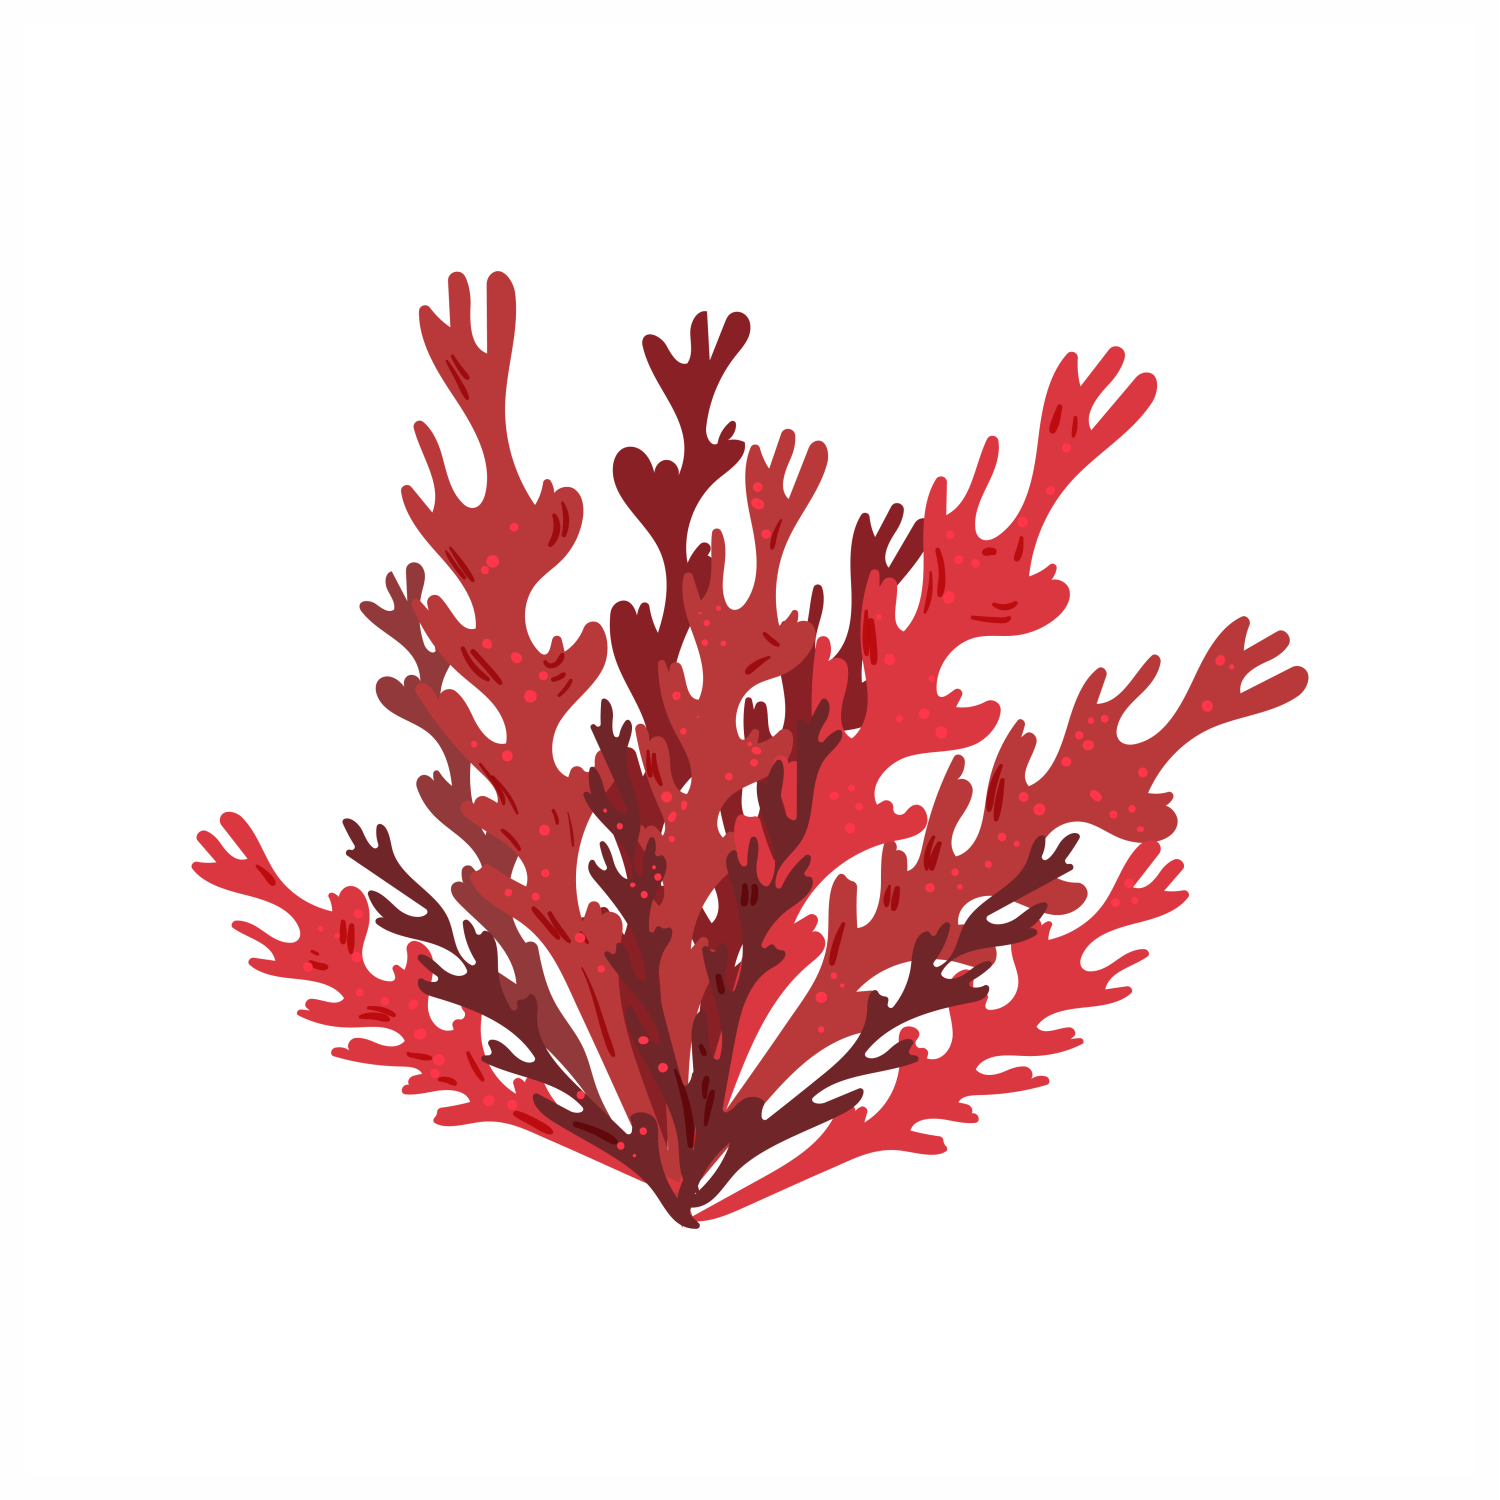 Chondrus Crispus (Carrageenan/Red Algae) Extract: From the Deep Blue Sea to Your Skin